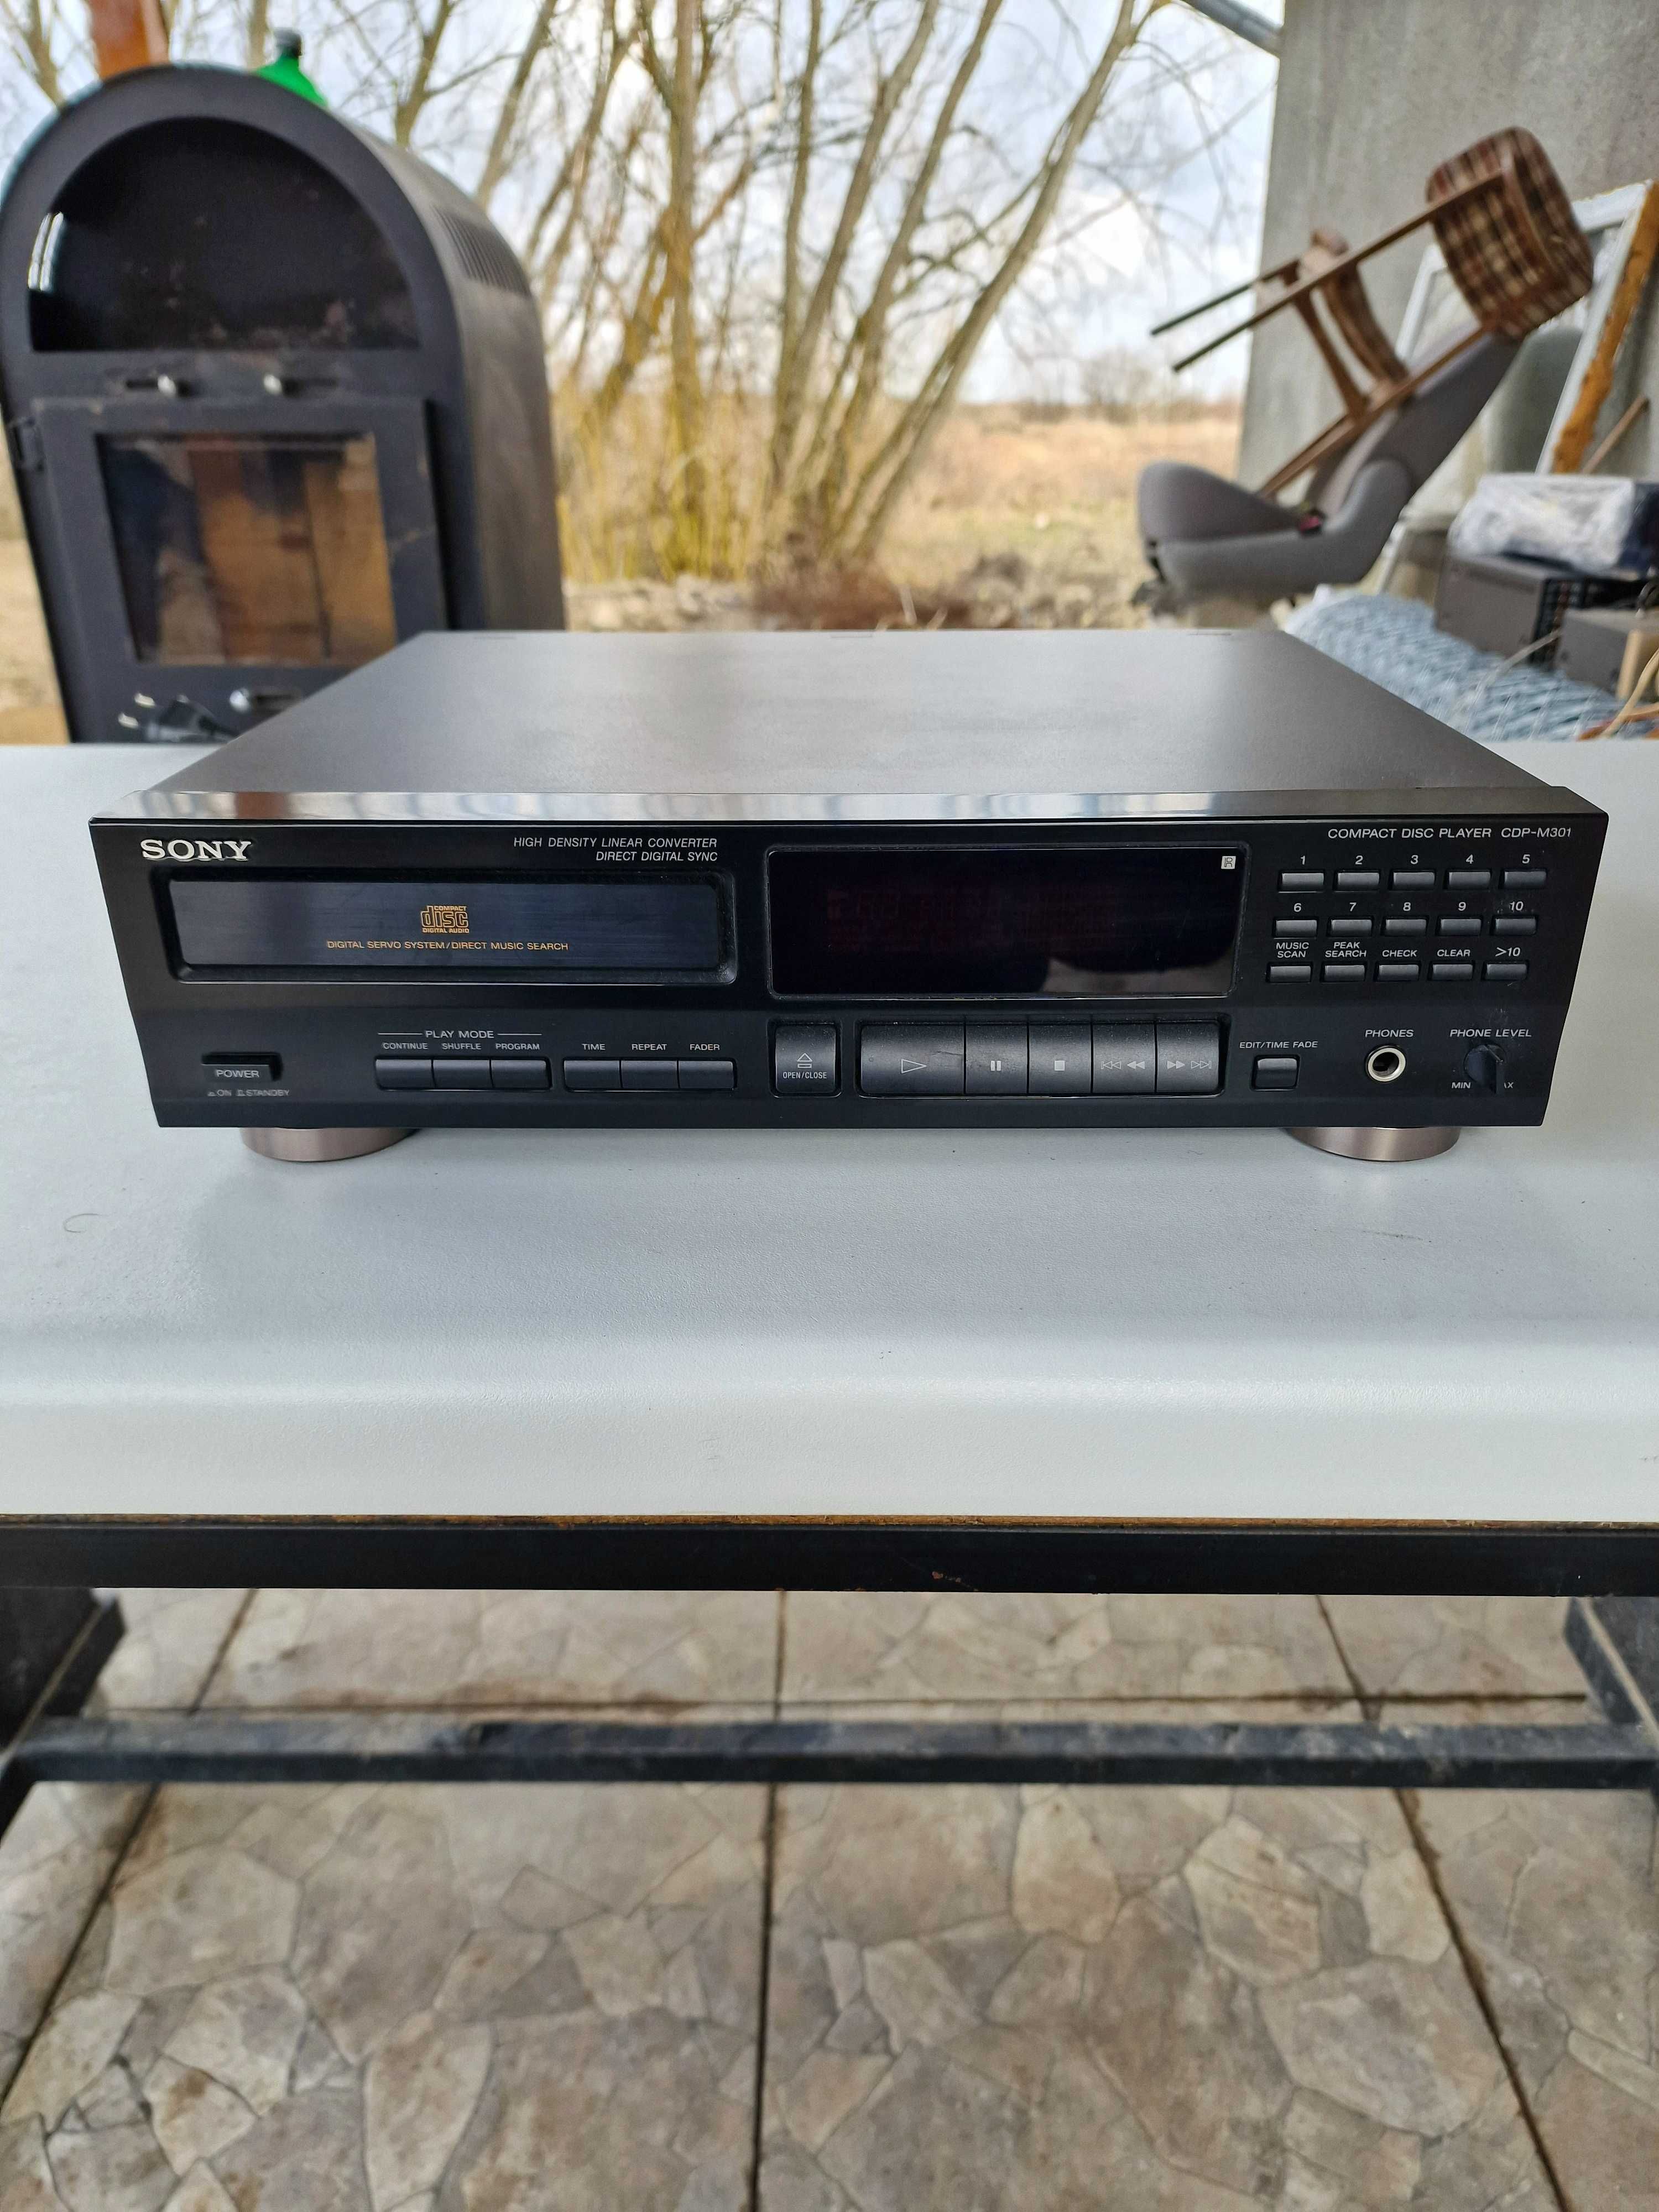 Compact Disc Player Sony Model: CDP-M301, in stare excelenta!